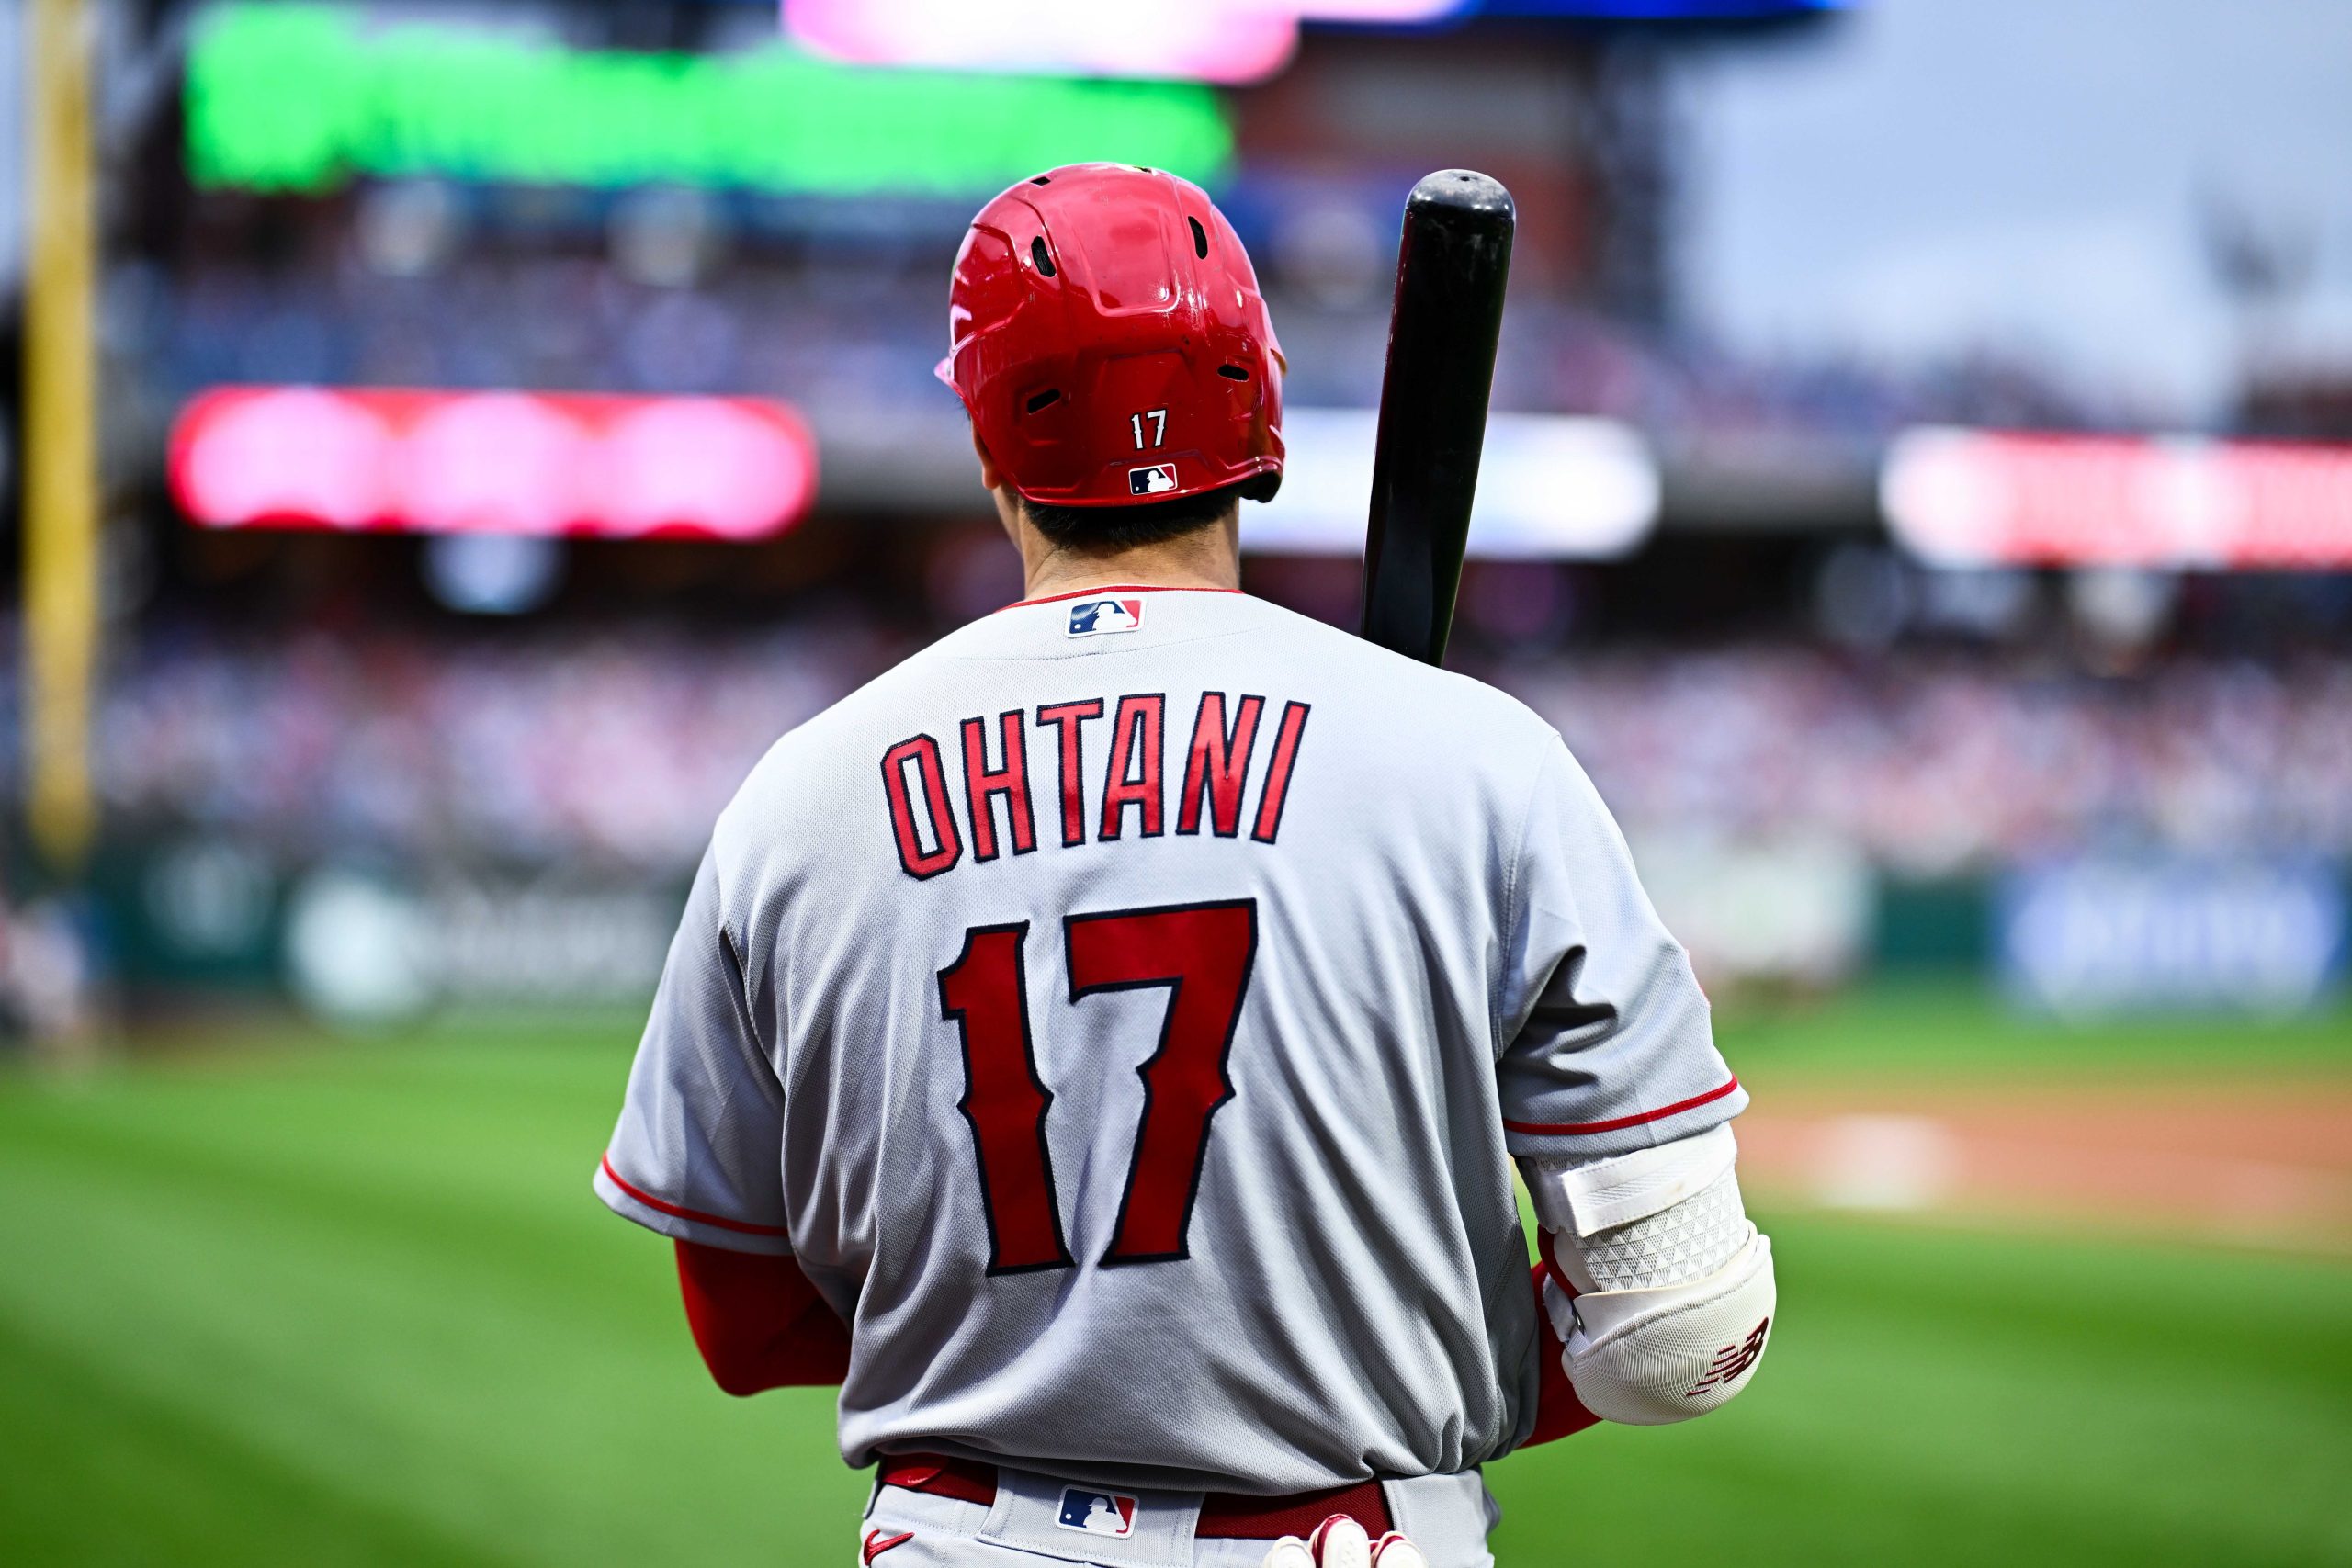 Angels News: Shohei Ohtani Not Thinking About Contract Or Potential  Extension